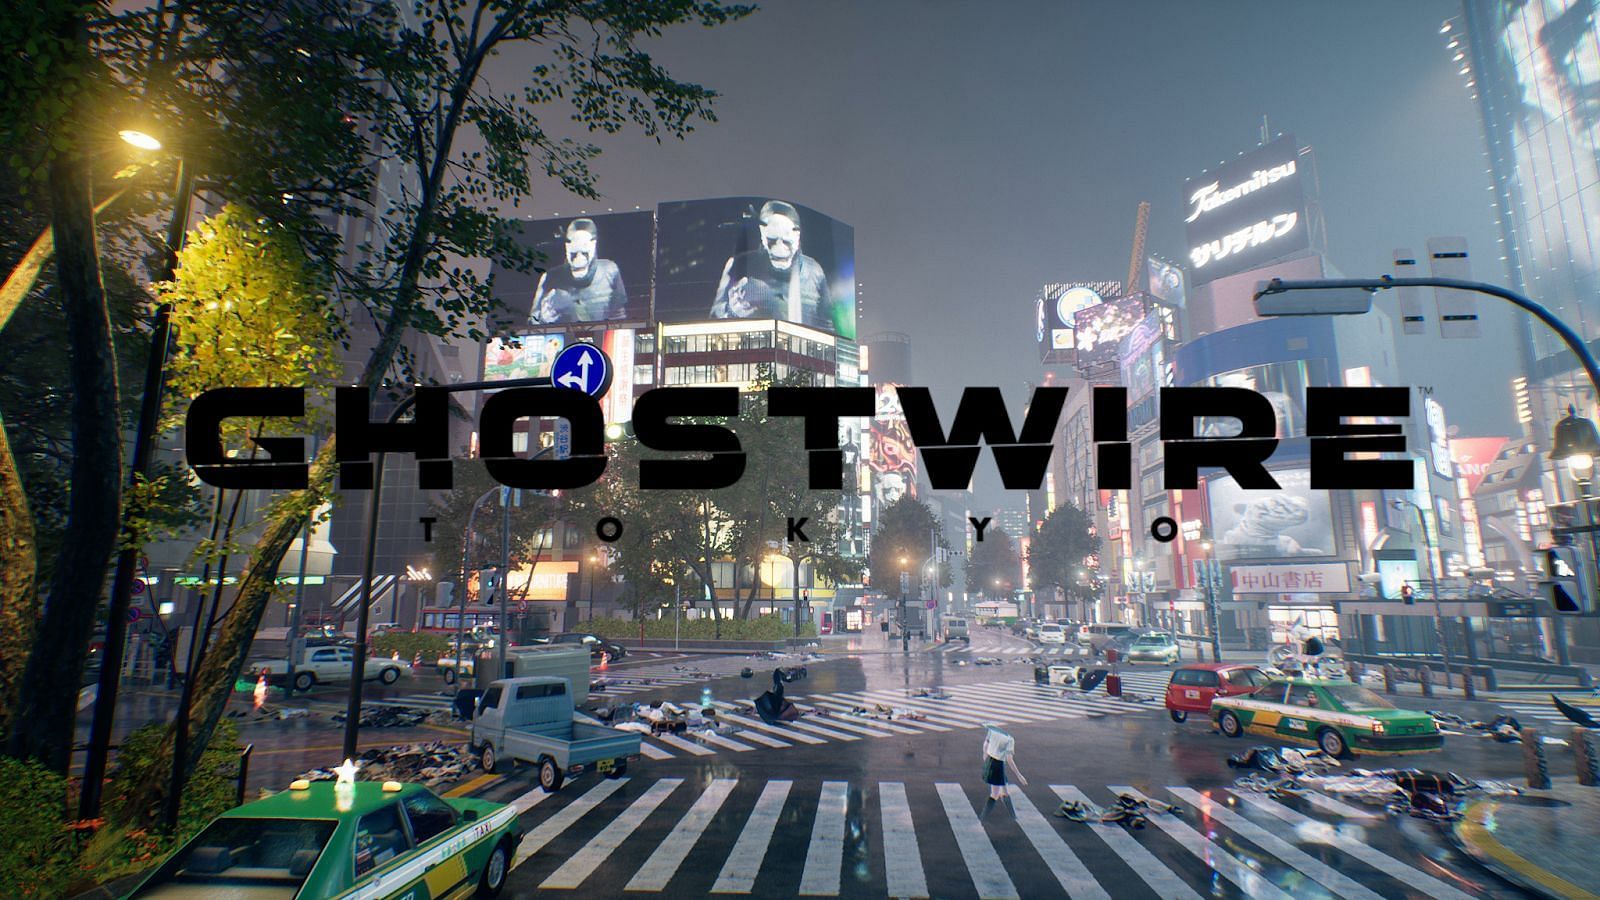 Ghostwire Tokyo brings an authentic yet eerie rain-soaked, neon-lit city to life. (Image by Bethesda)